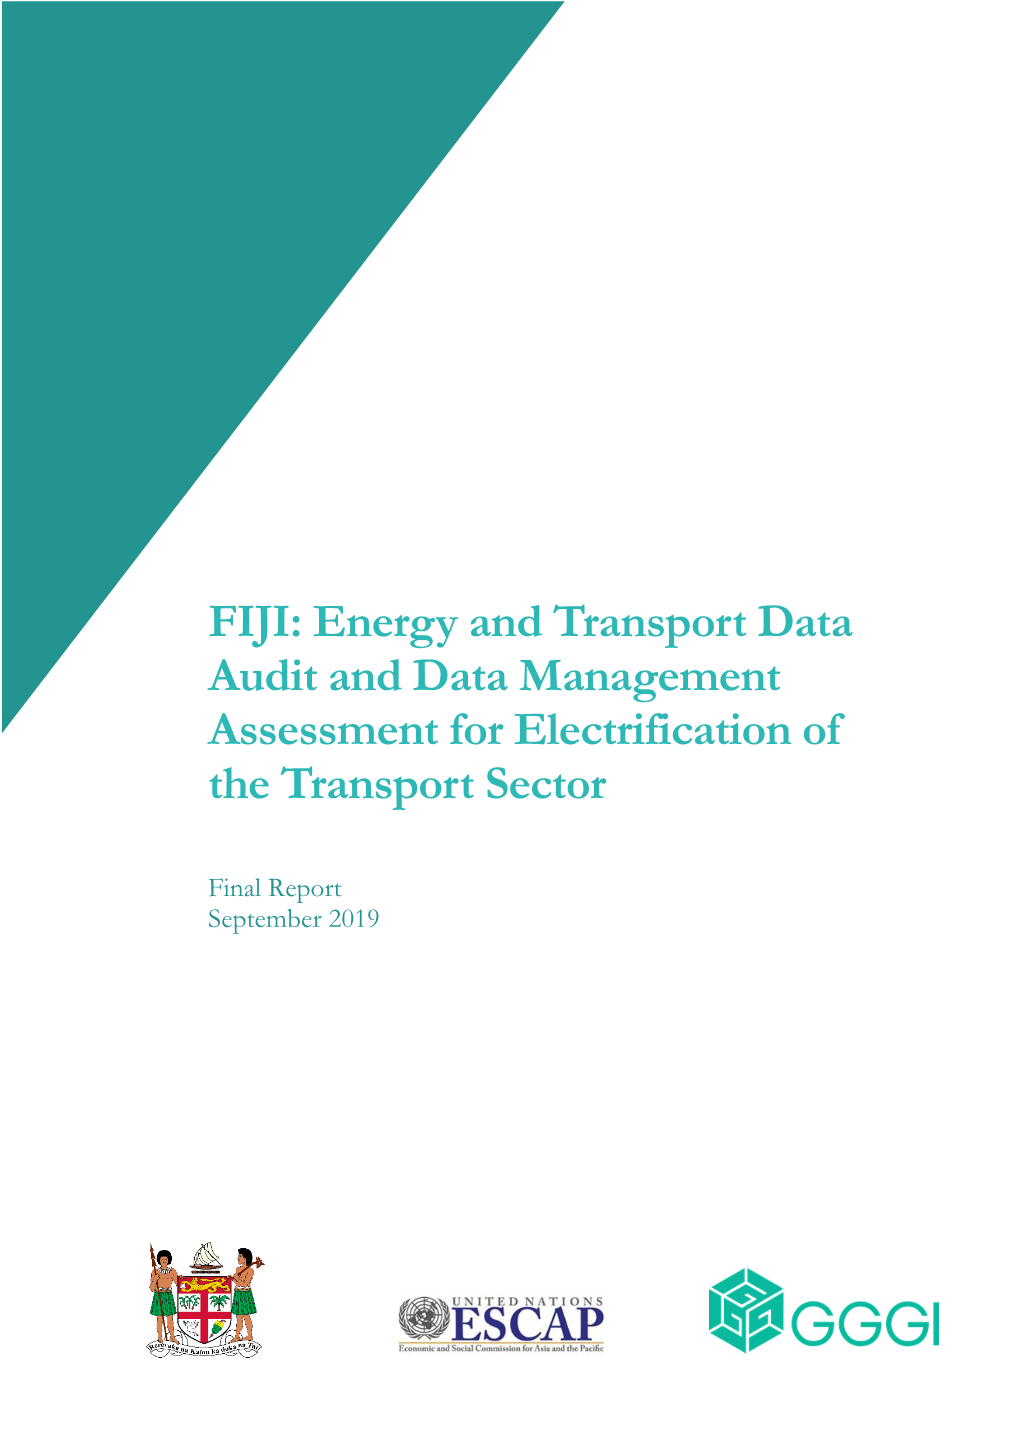 FIJI: Energy and Transport Data Audit and Data Management Assessment for Electrification of the Transport Sector